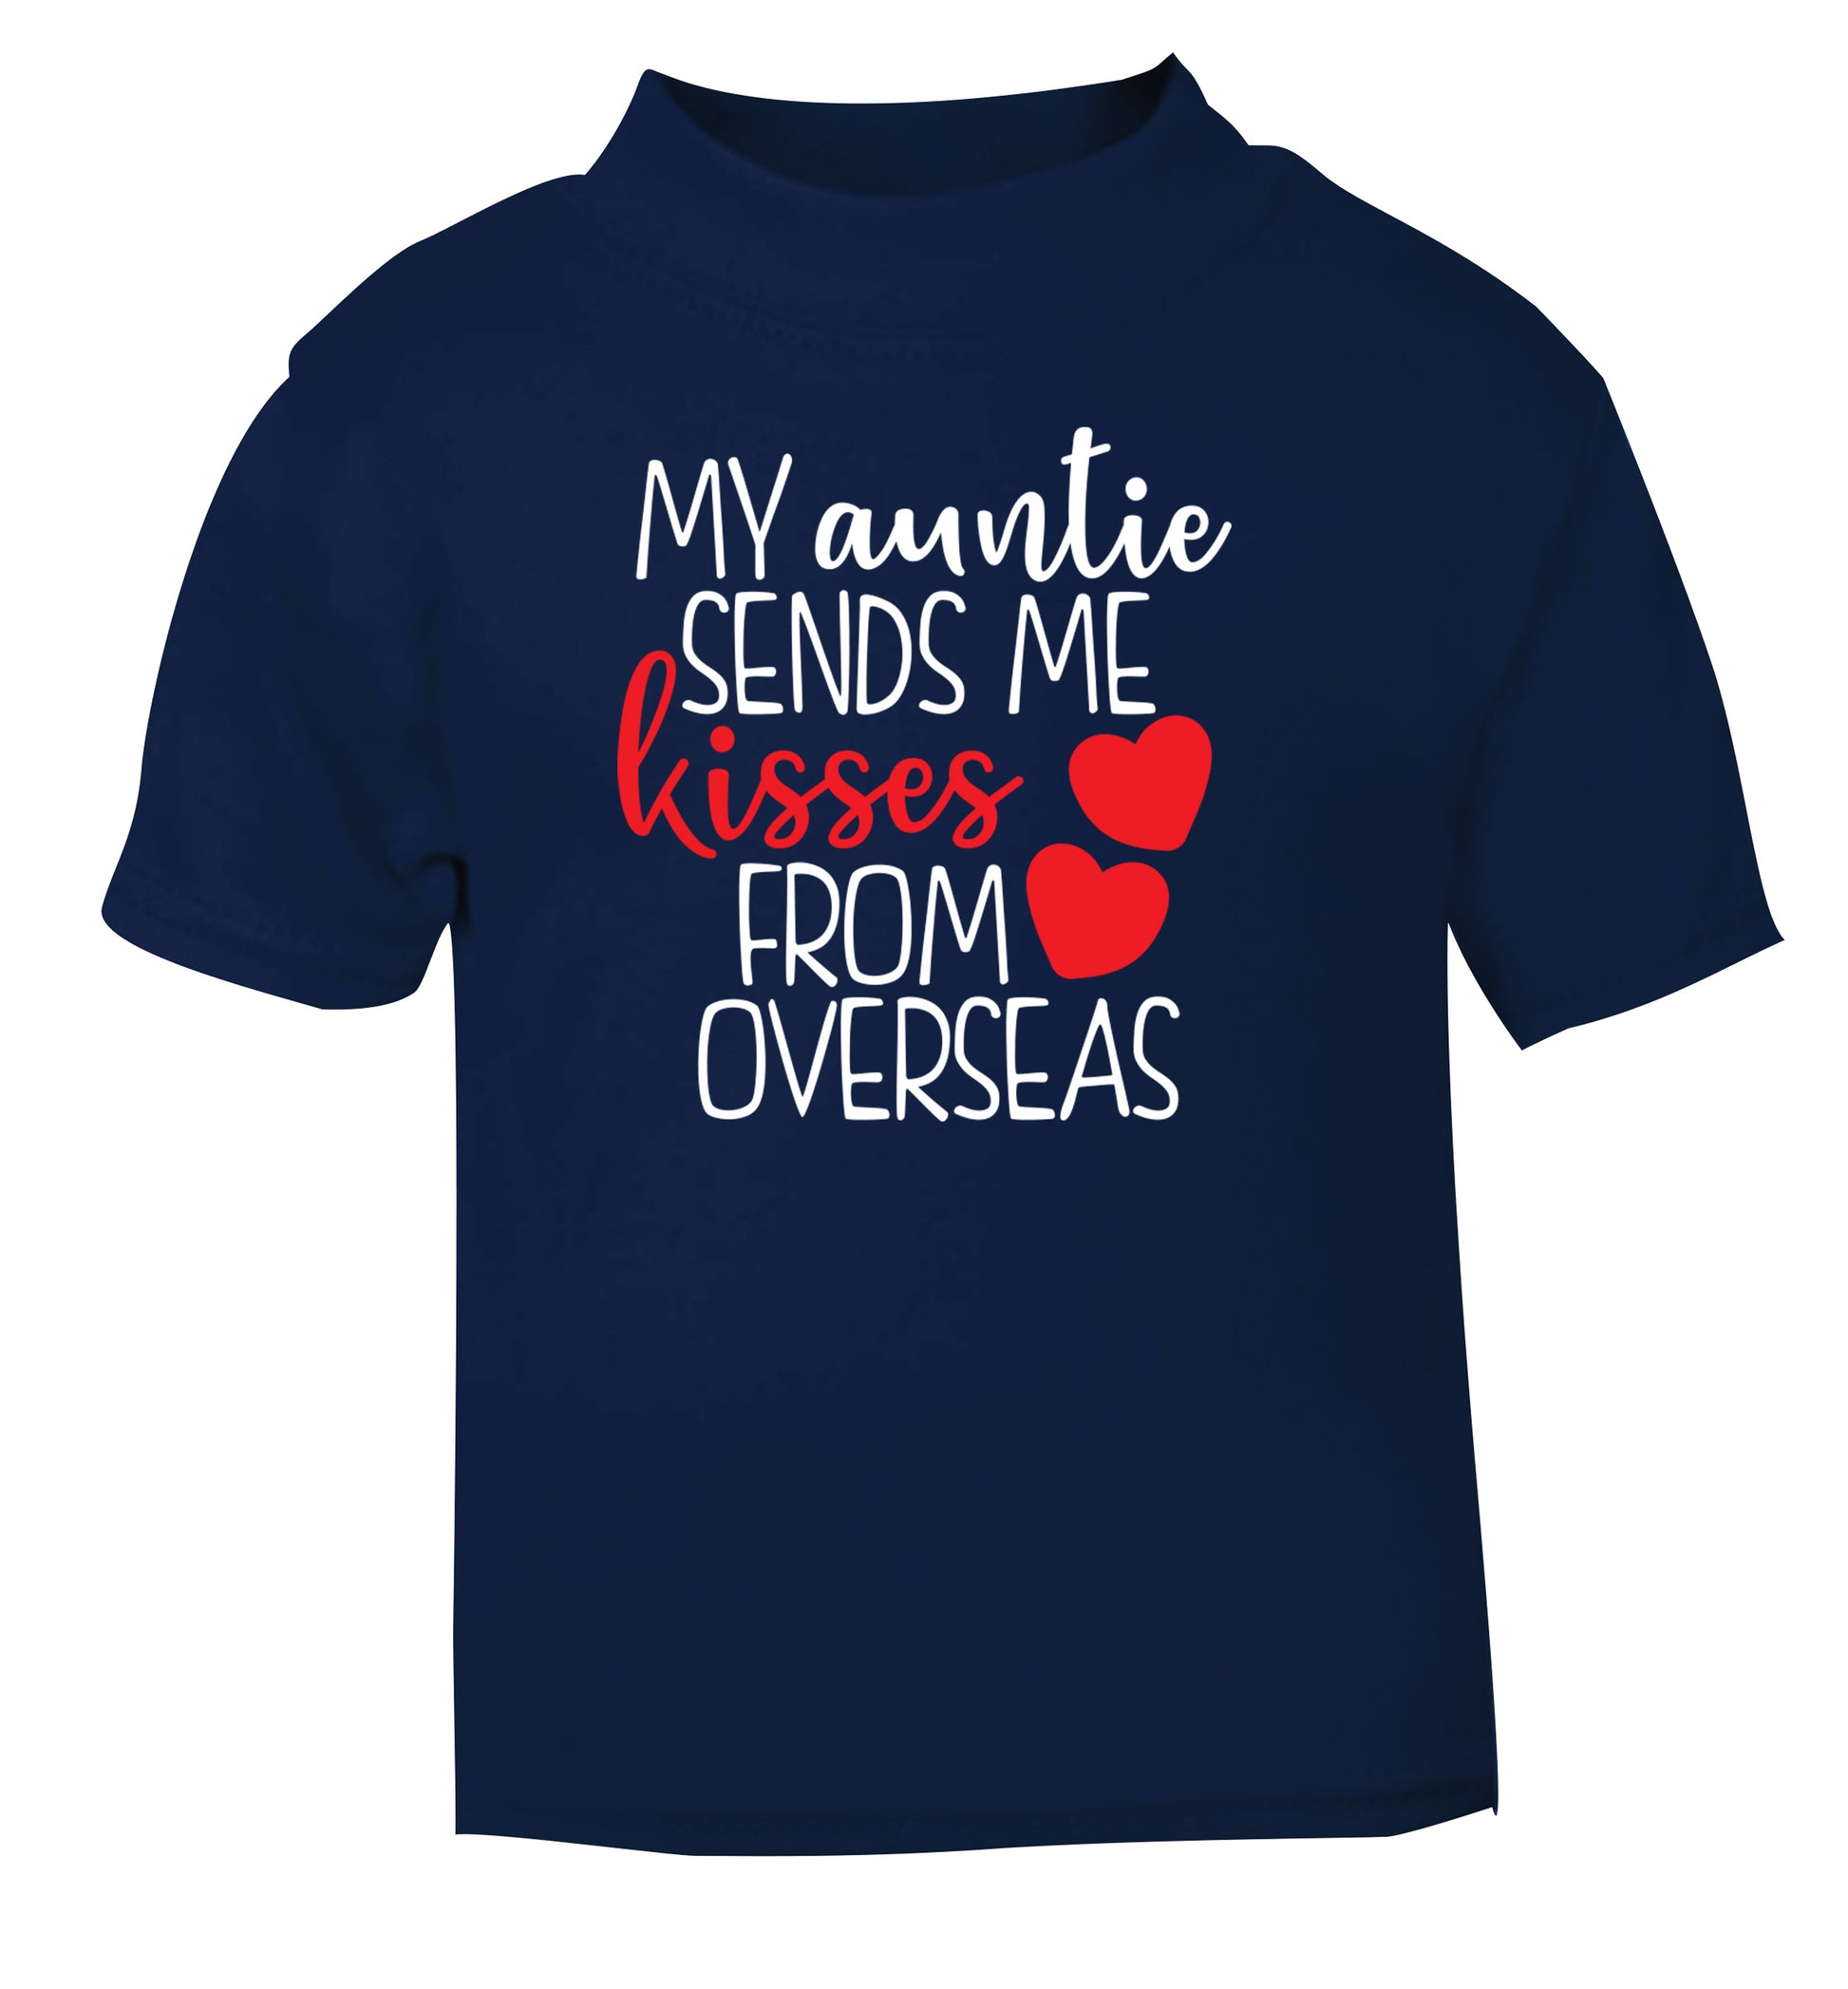 My auntie sends me kisses from overseas navy Baby Toddler Tshirt 2 Years